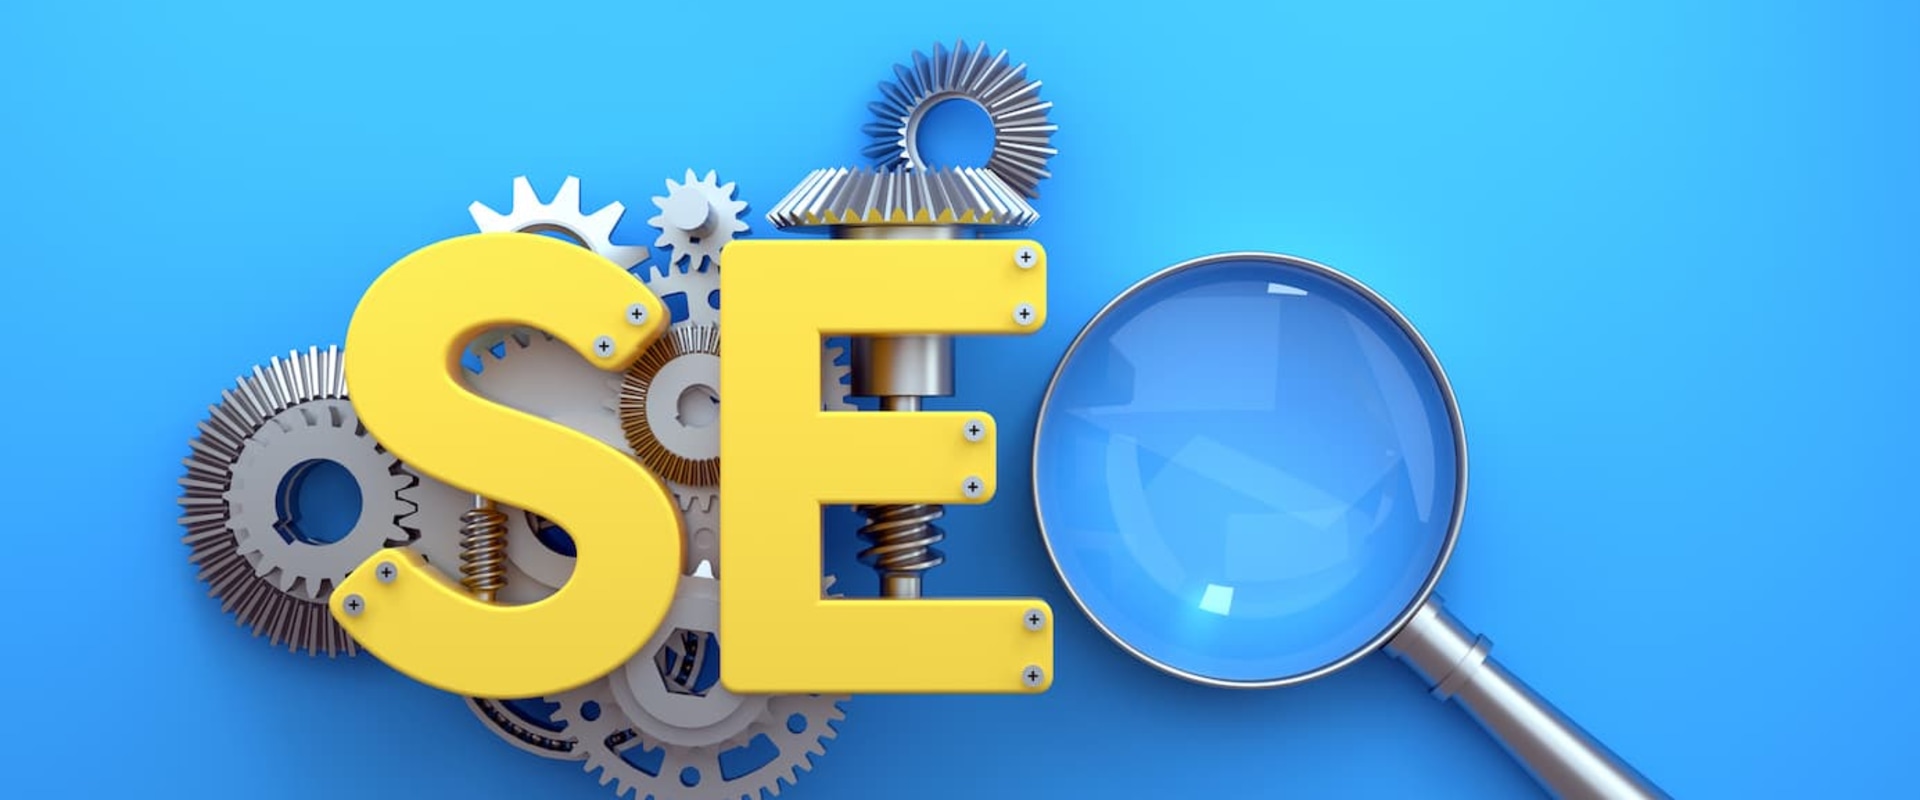 What businesses use search engine optimization?